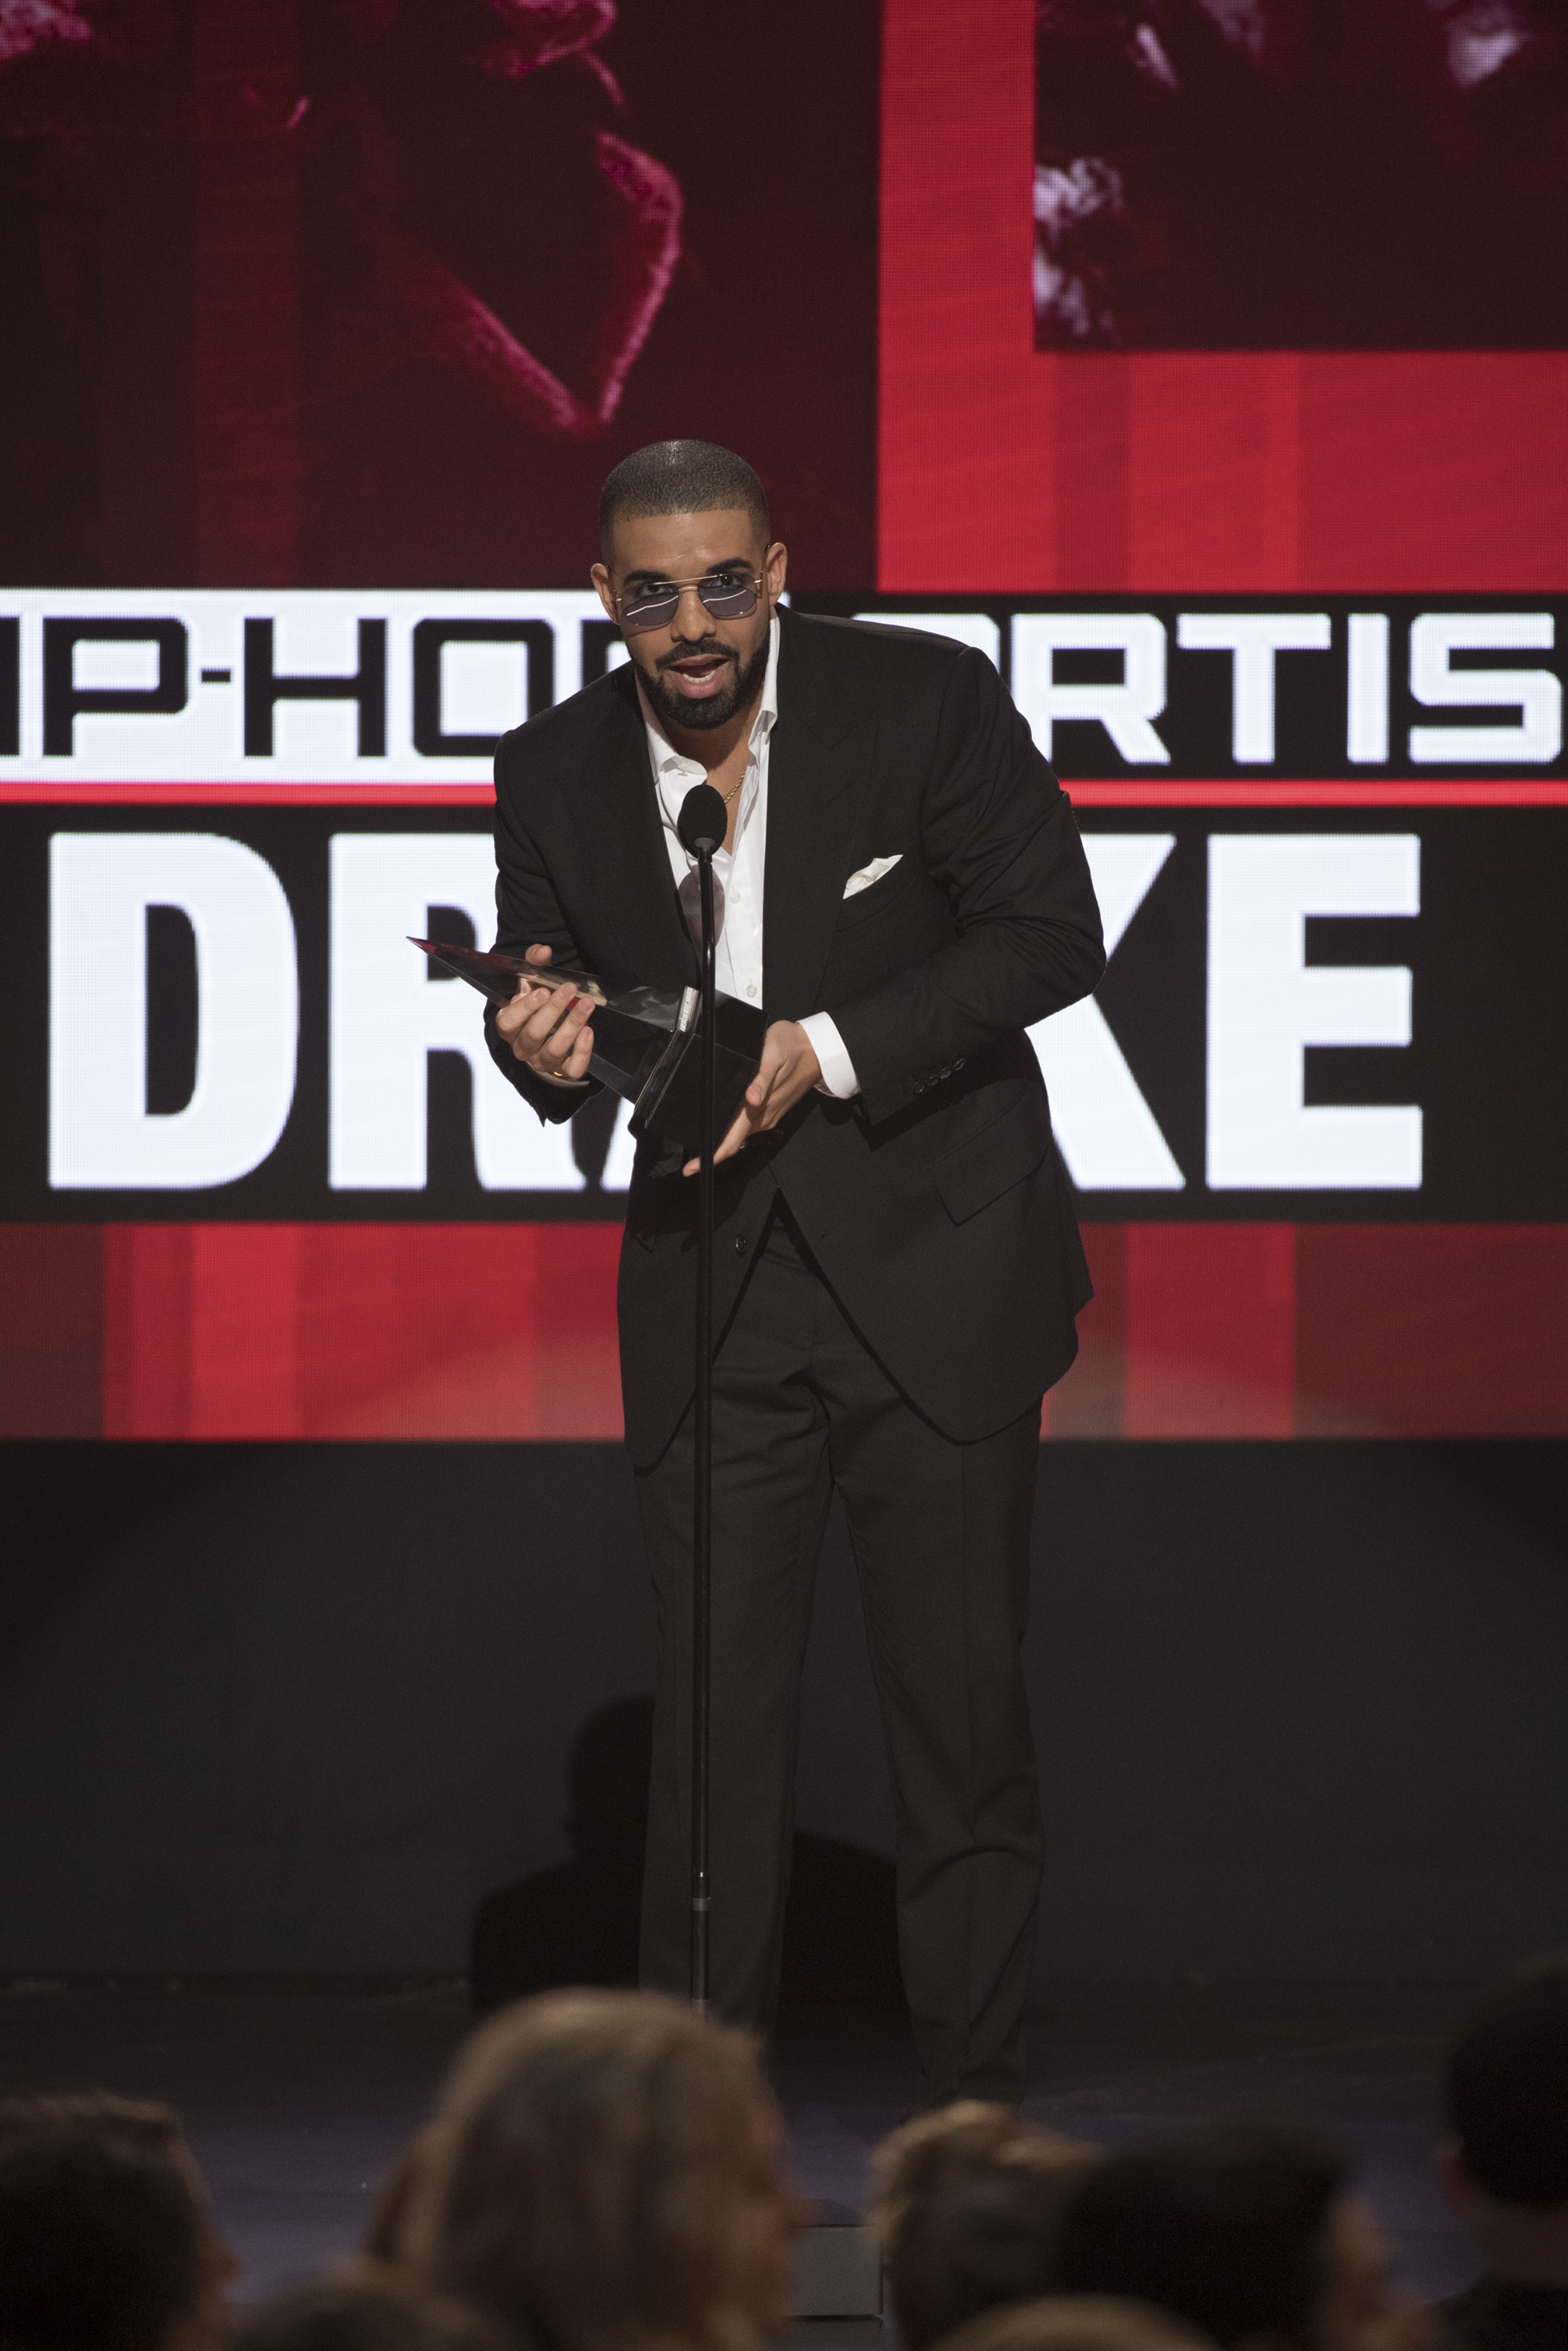 THE 2016 AMERICAN MUSIC AWARDS(r) - The “2016 American Music Awards,” the world’s biggest fan-voted award show, broadcasts live from the Microsoft Theater in Los Angeles on SUNDAY, NOVEMBER 20, at 8:00 p.m. EST, on ABC. (Image Group LA/ABC) DRAKE